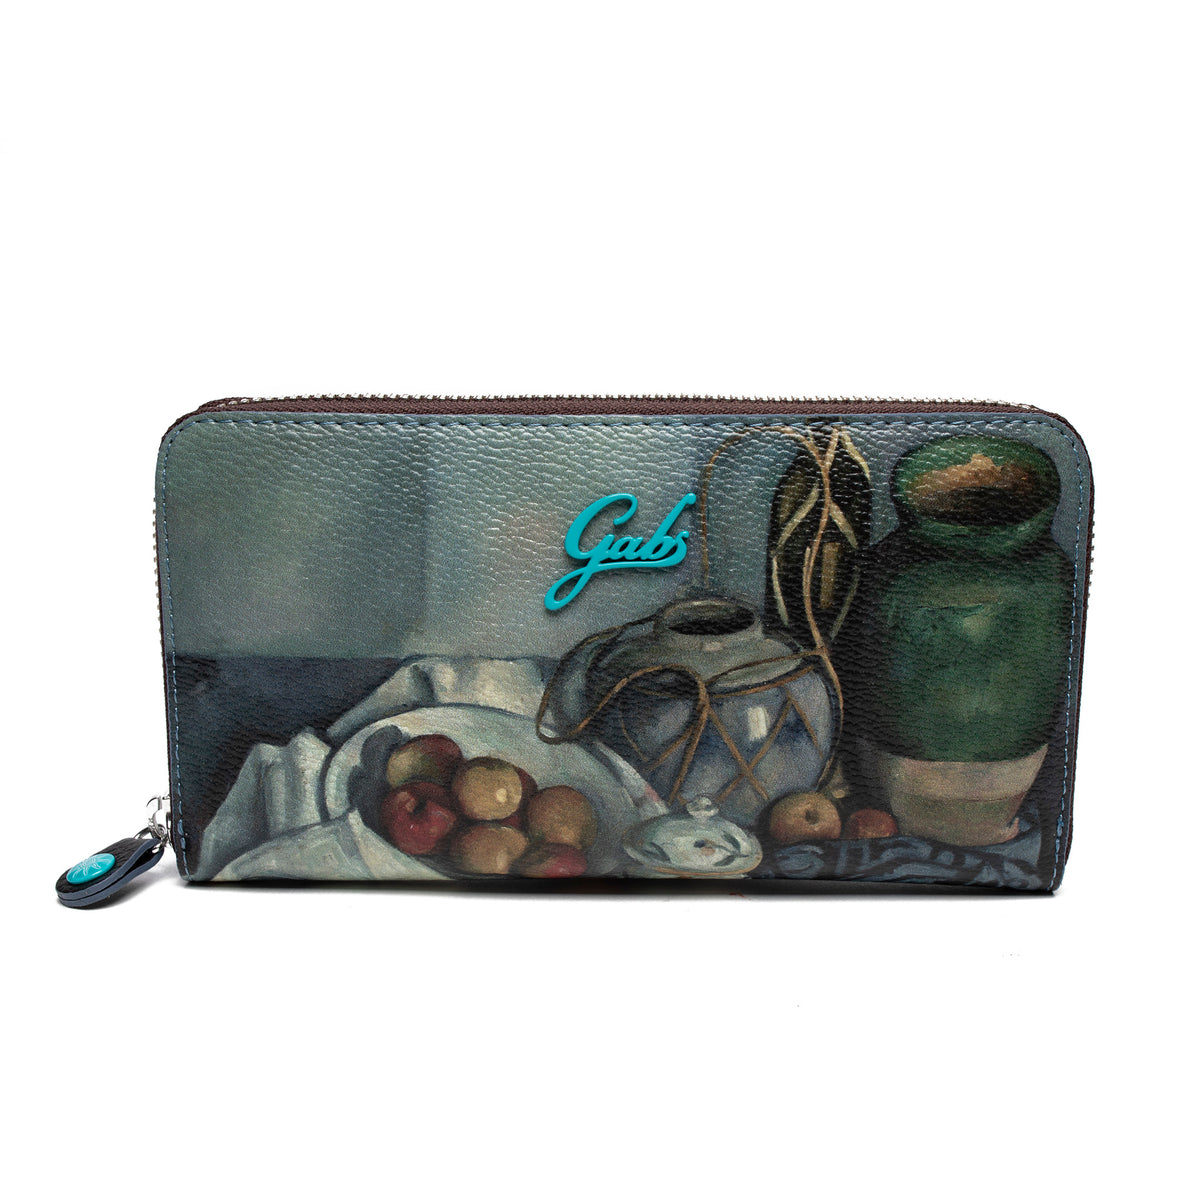 Wallet featuring Cezanne&#39;s Still Life with Fruit by Gabs, Italy